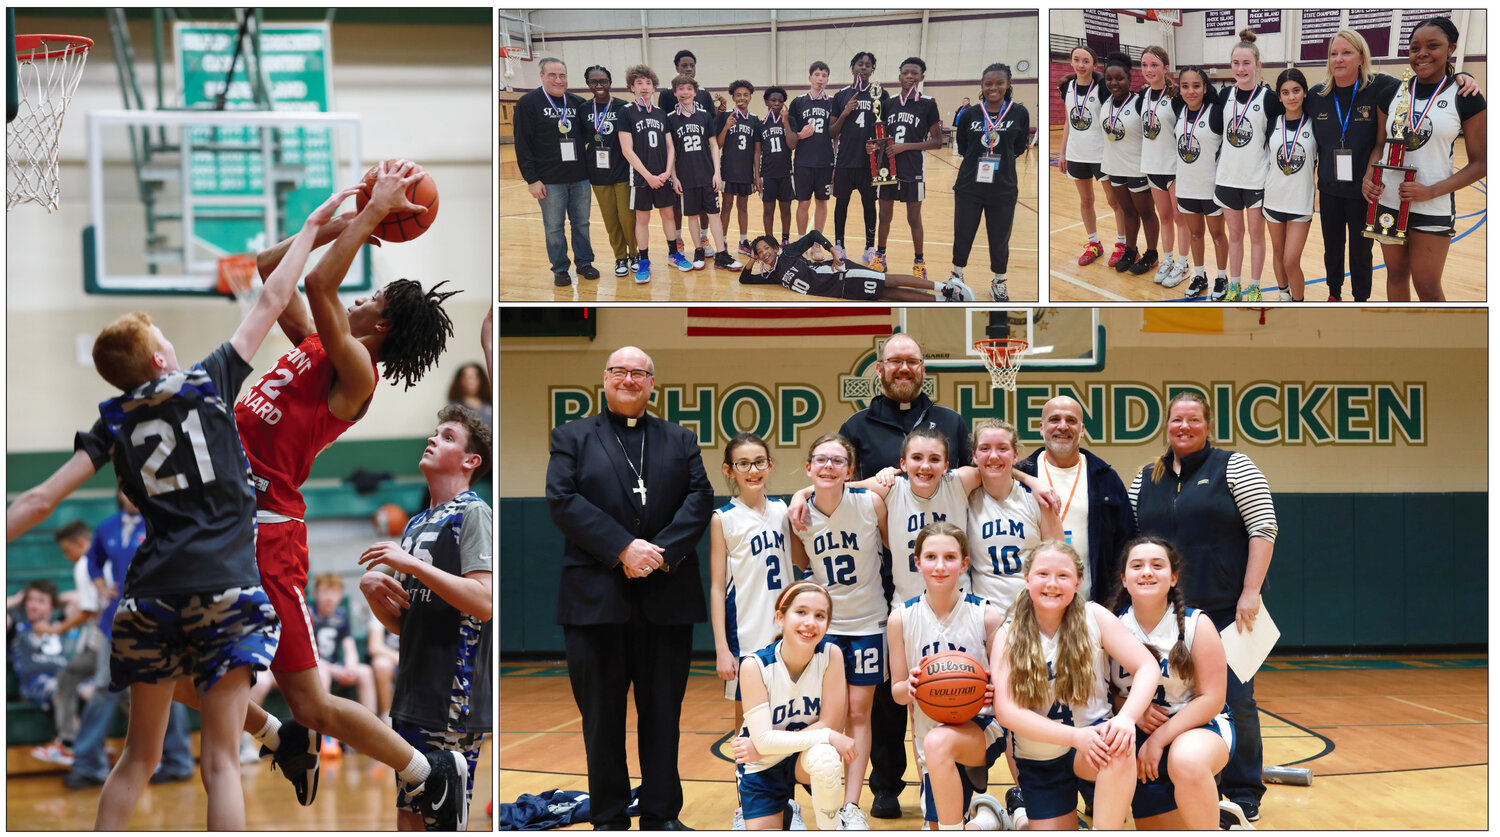 Pictured at top right, both St. Pius V Parish girls and boys teams celebrate first place victories. Pictured above at right, Friday night, Our Lady of Mercy School’s girls basketball enjoyed a 36-24 win over St. Catherine of Siena of Trumbull, Connecticut, at Bishop Hendricken High School to advance in the tournament. Bishop Richard G. Henning and Father Daniel M. Mahoney cheer on the team. The team took second place after a very close 24-22 championship game to St. Mary’s of Hartford, which took place on Sunday April 2, at La Salle Academy. At left, St. Bernard Church of Norwich, Conn. wins 69 to 33 against St. Mary’s of the Hill, Milton Massachusetts, Friday, March 31.